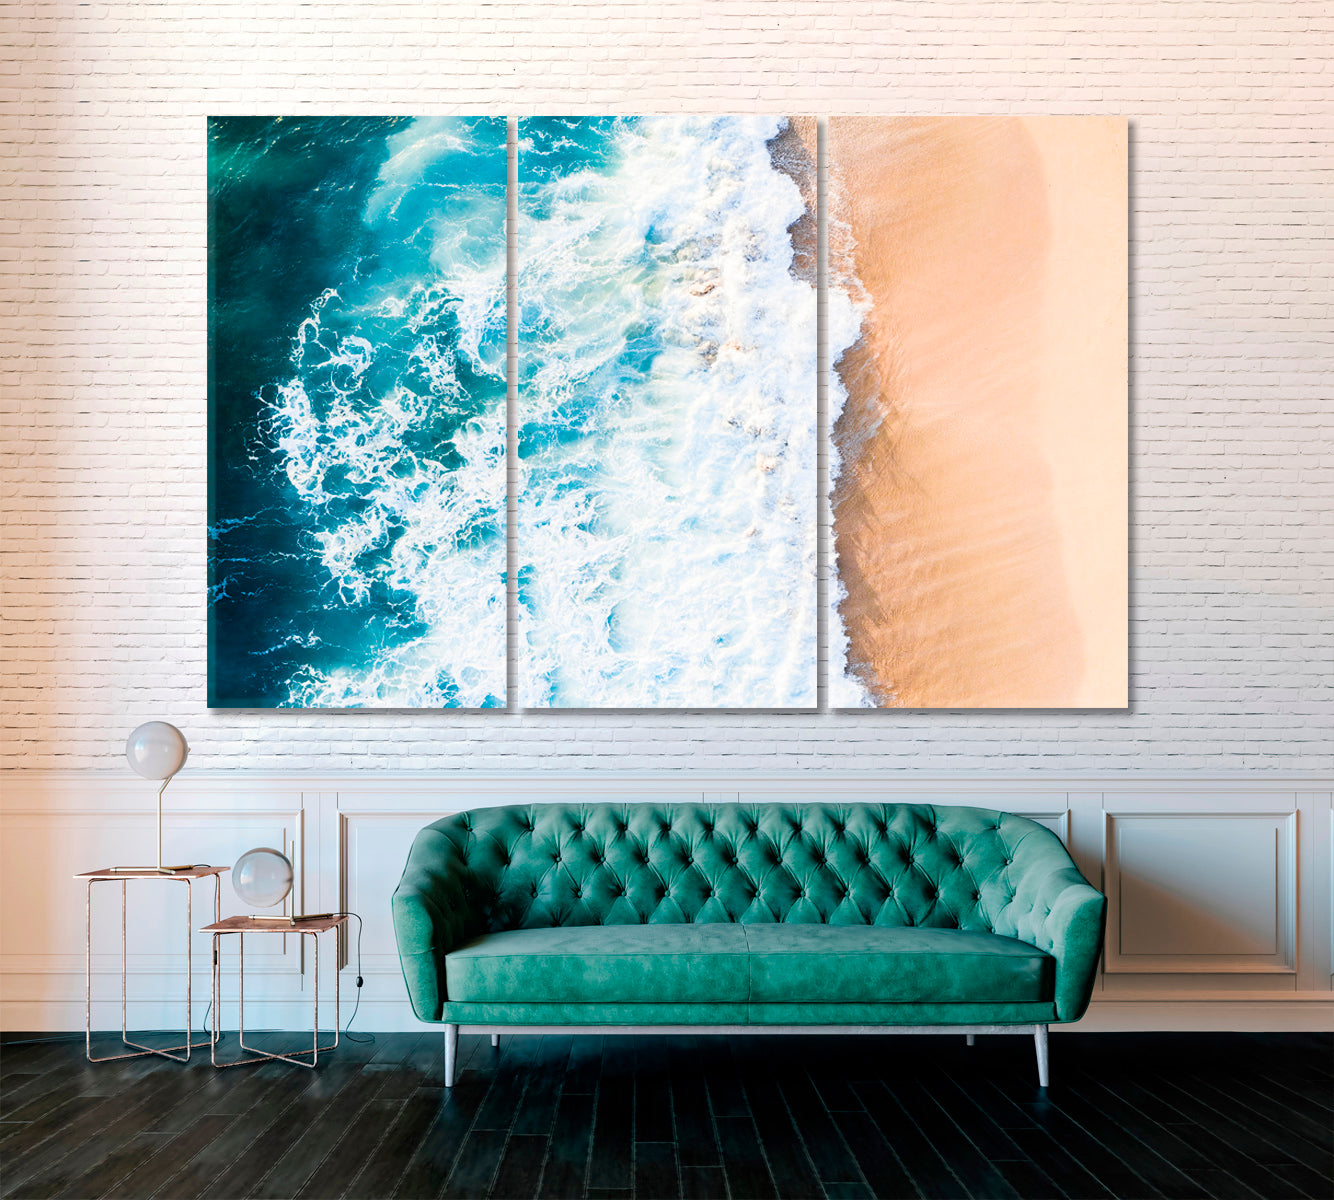 Beautiful Ocean Waves Canvas Print ArtLexy 3 Panels 36"x24" inches 